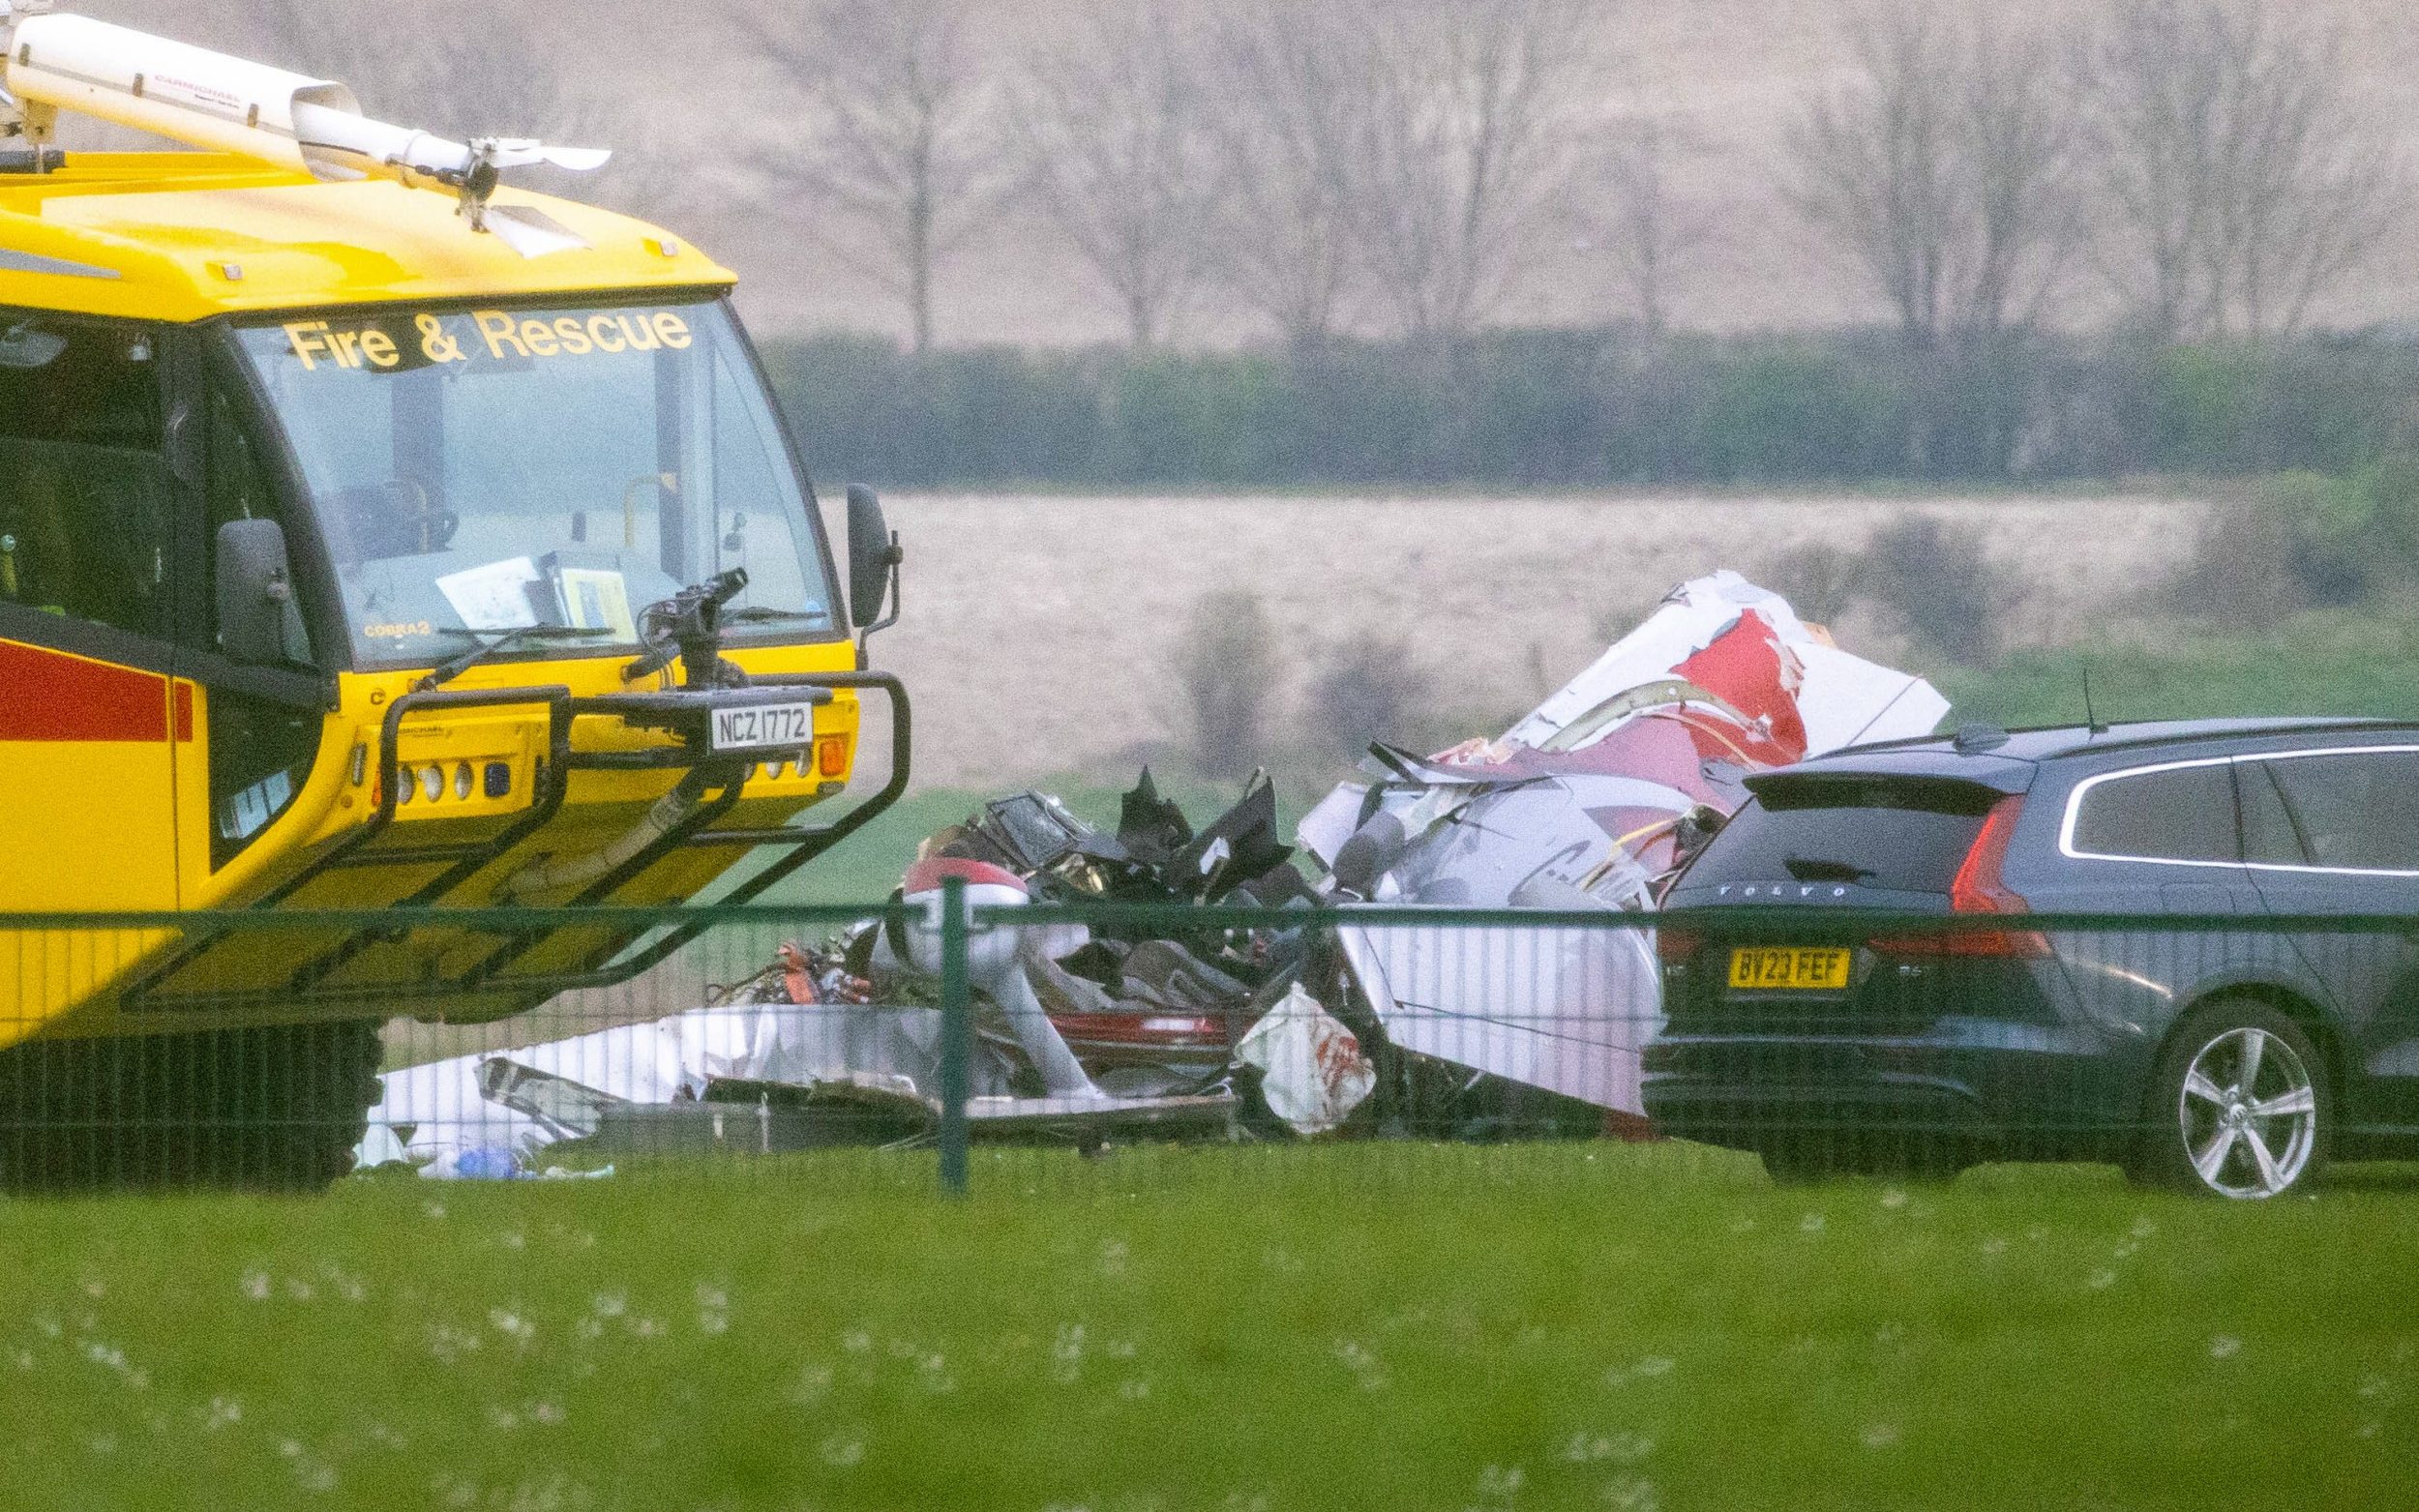 Wreckage of a red and white aircraft was visible to visitors at the museum